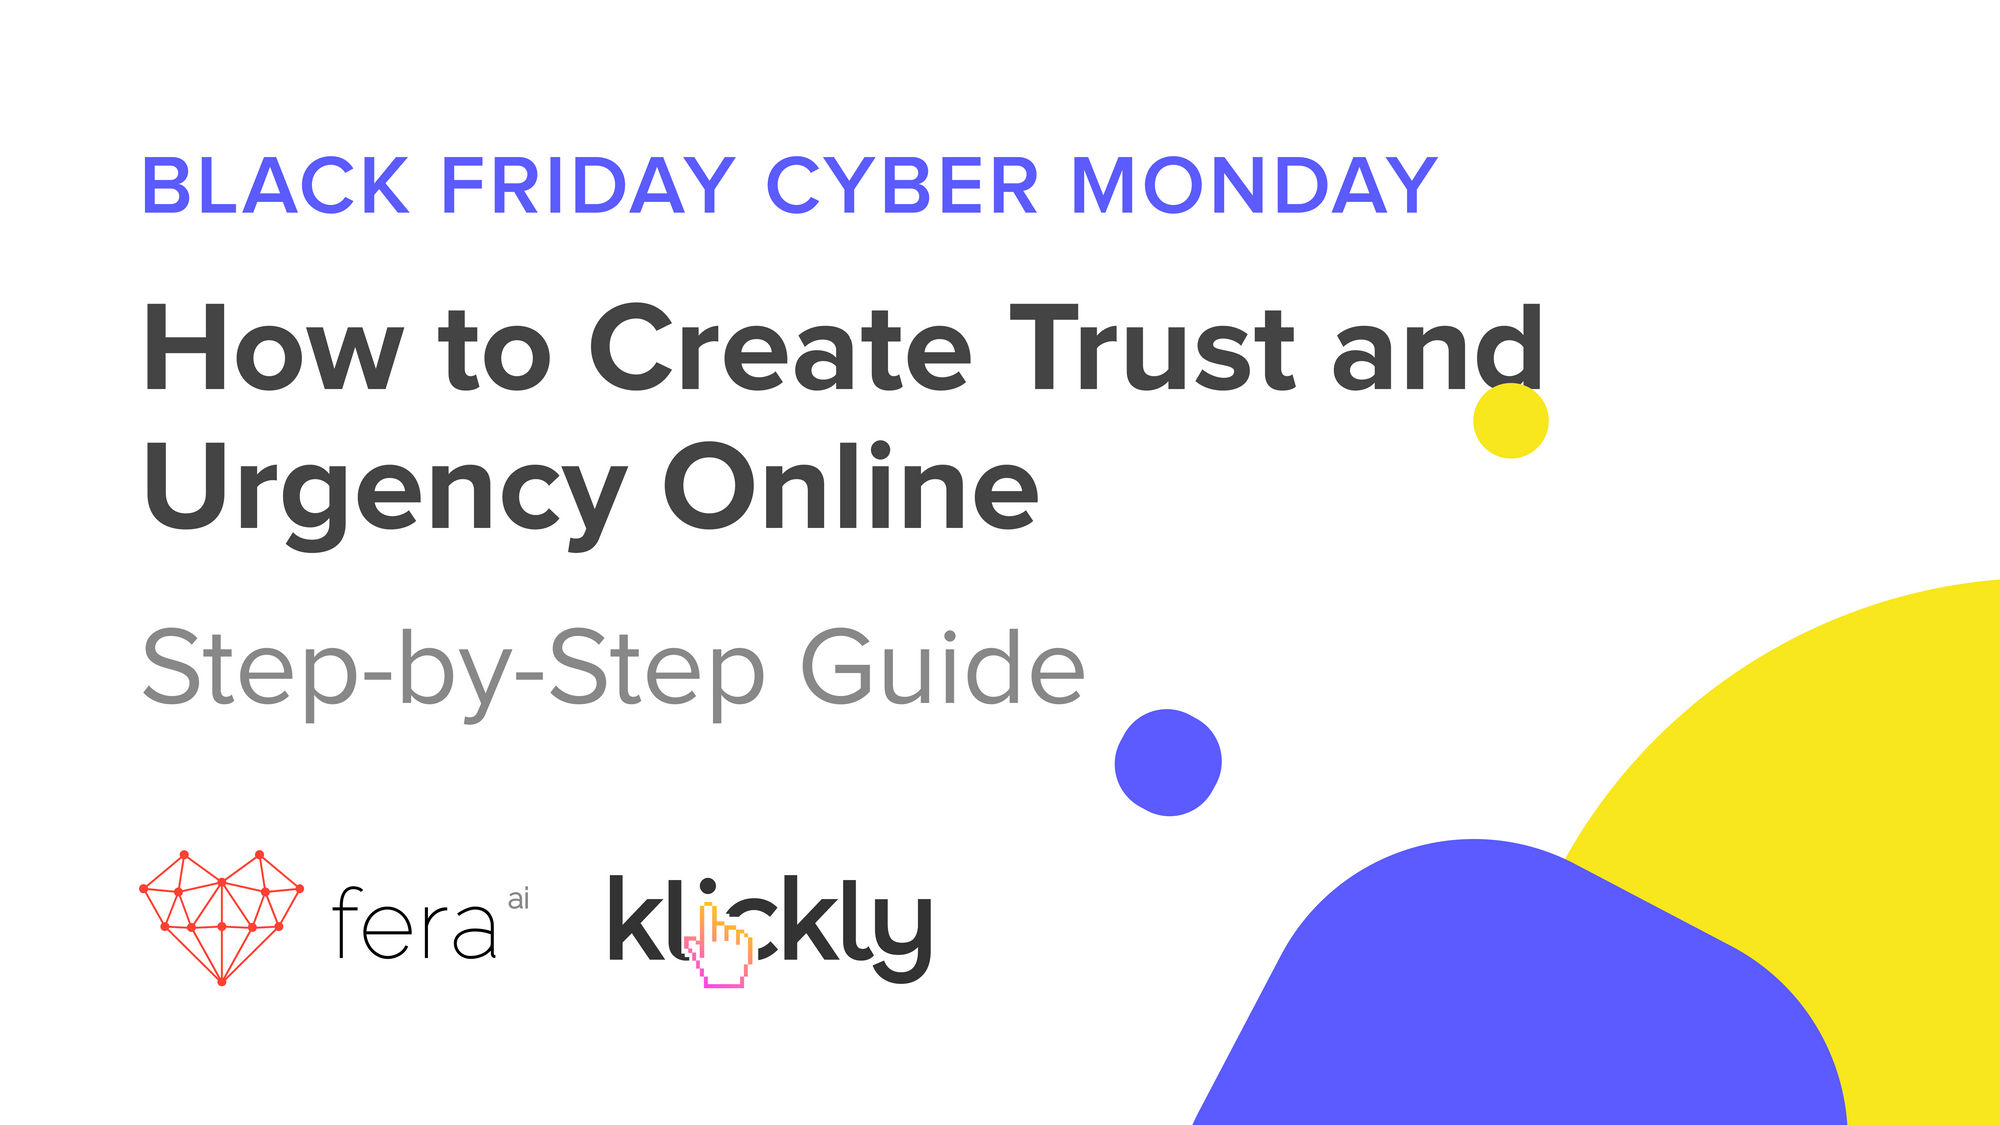 BFCM: HOW TO CREATE TRUST AND URGENCY ONLINE